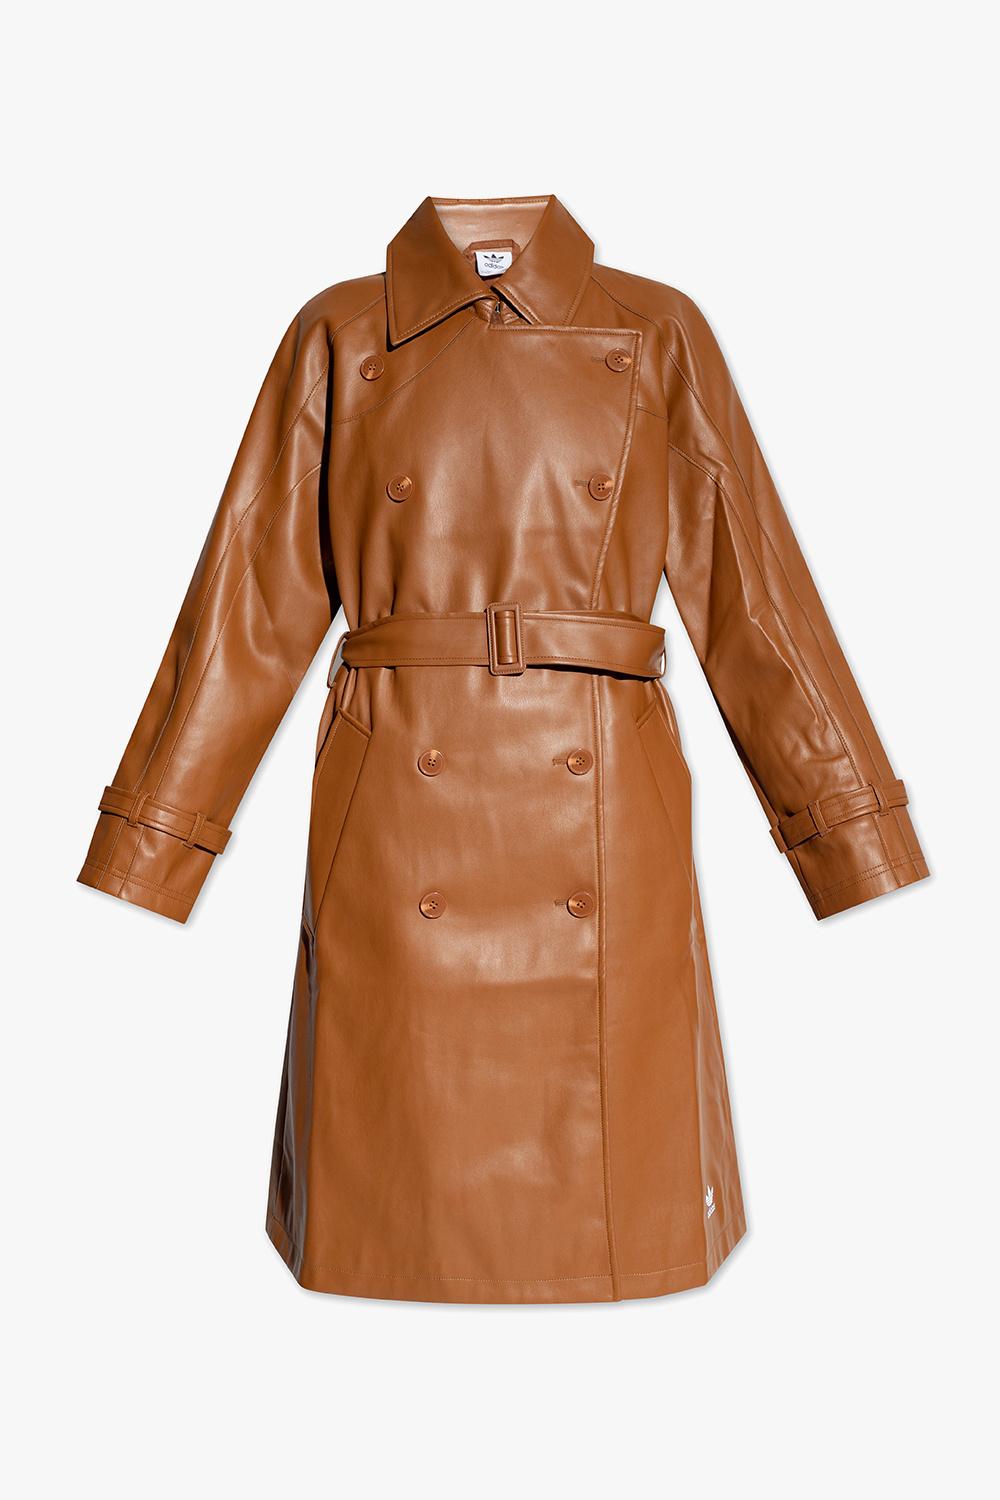 adidas Originals Double-breasted Trench Coat in Brown | Lyst Australia